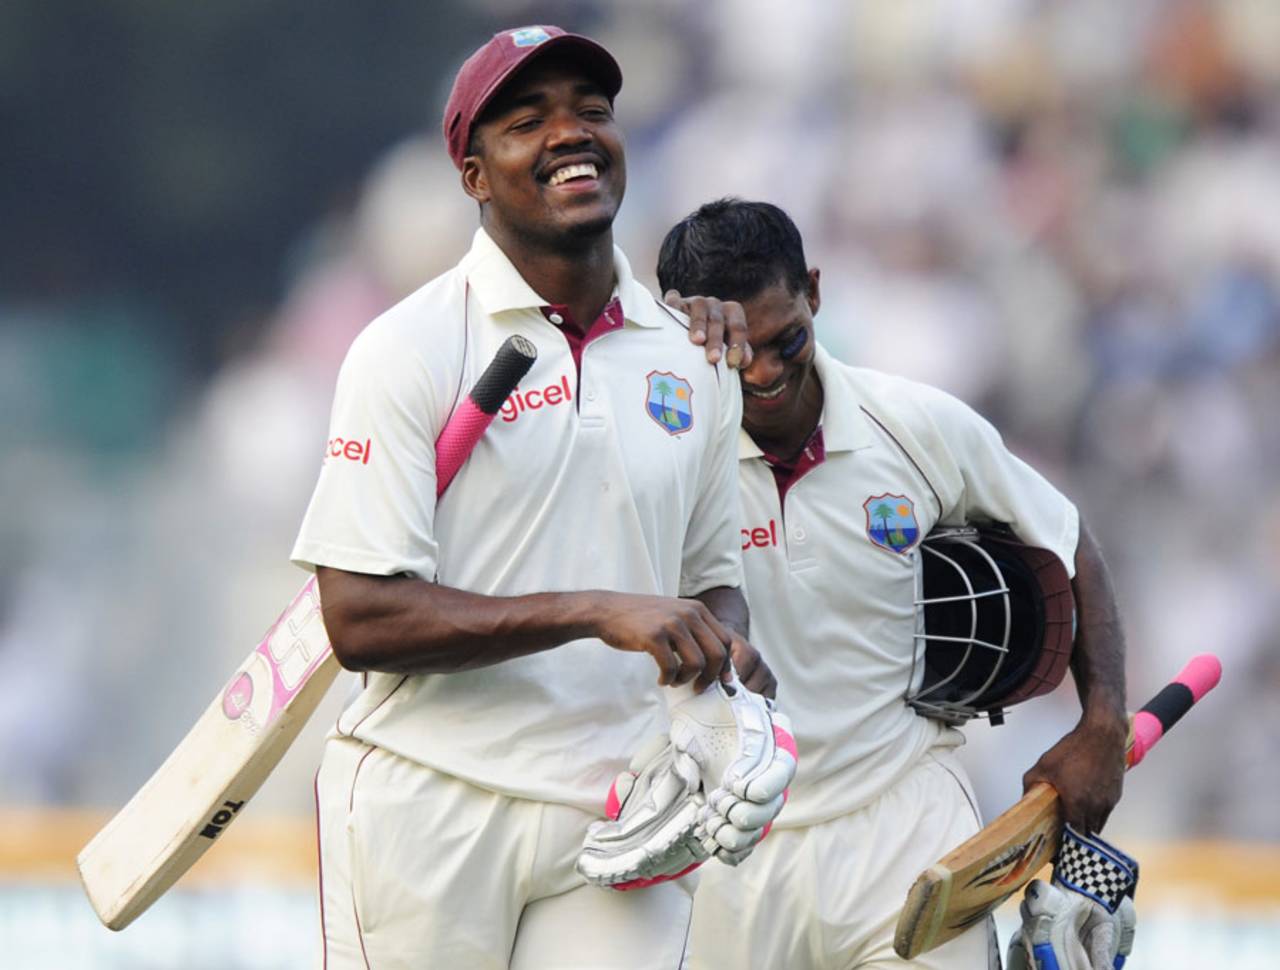 Darren Bravo will need to show some of the consistency Shivnarine Chanderpaul was known to have as a Test batsman&nbsp;&nbsp;&bull;&nbsp;&nbsp;AFP